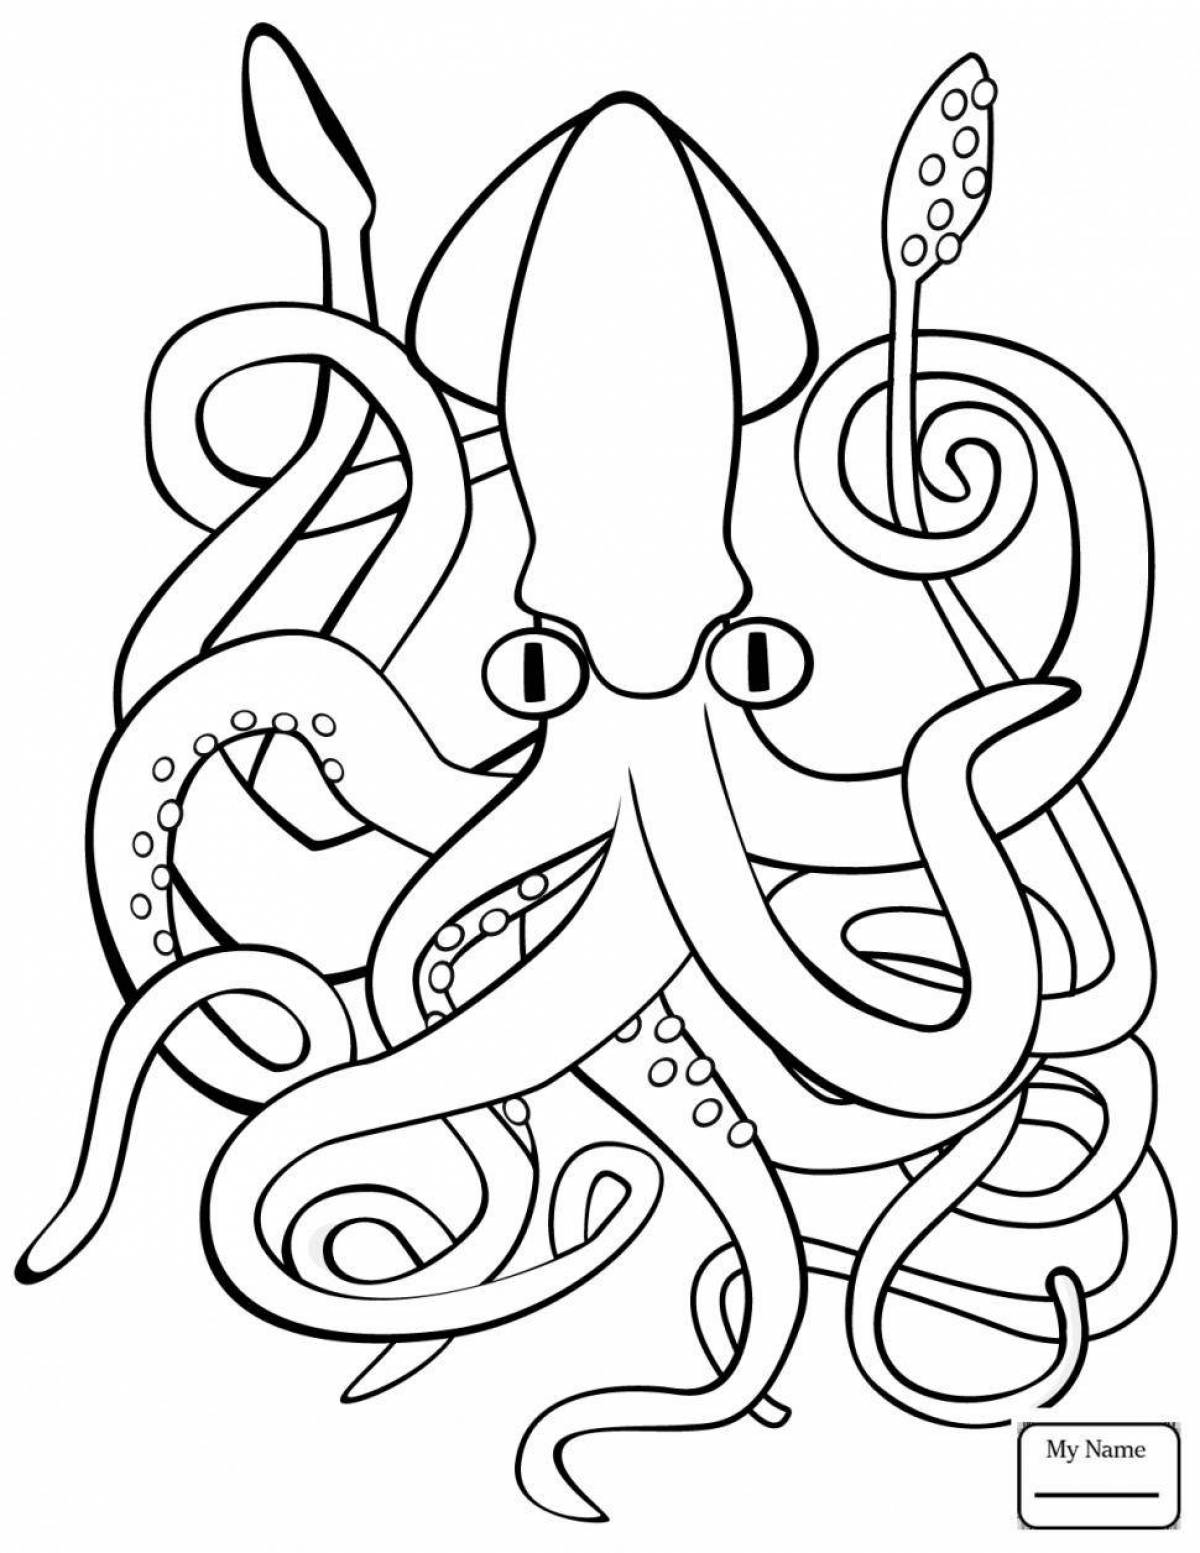 Charming squid coloring book